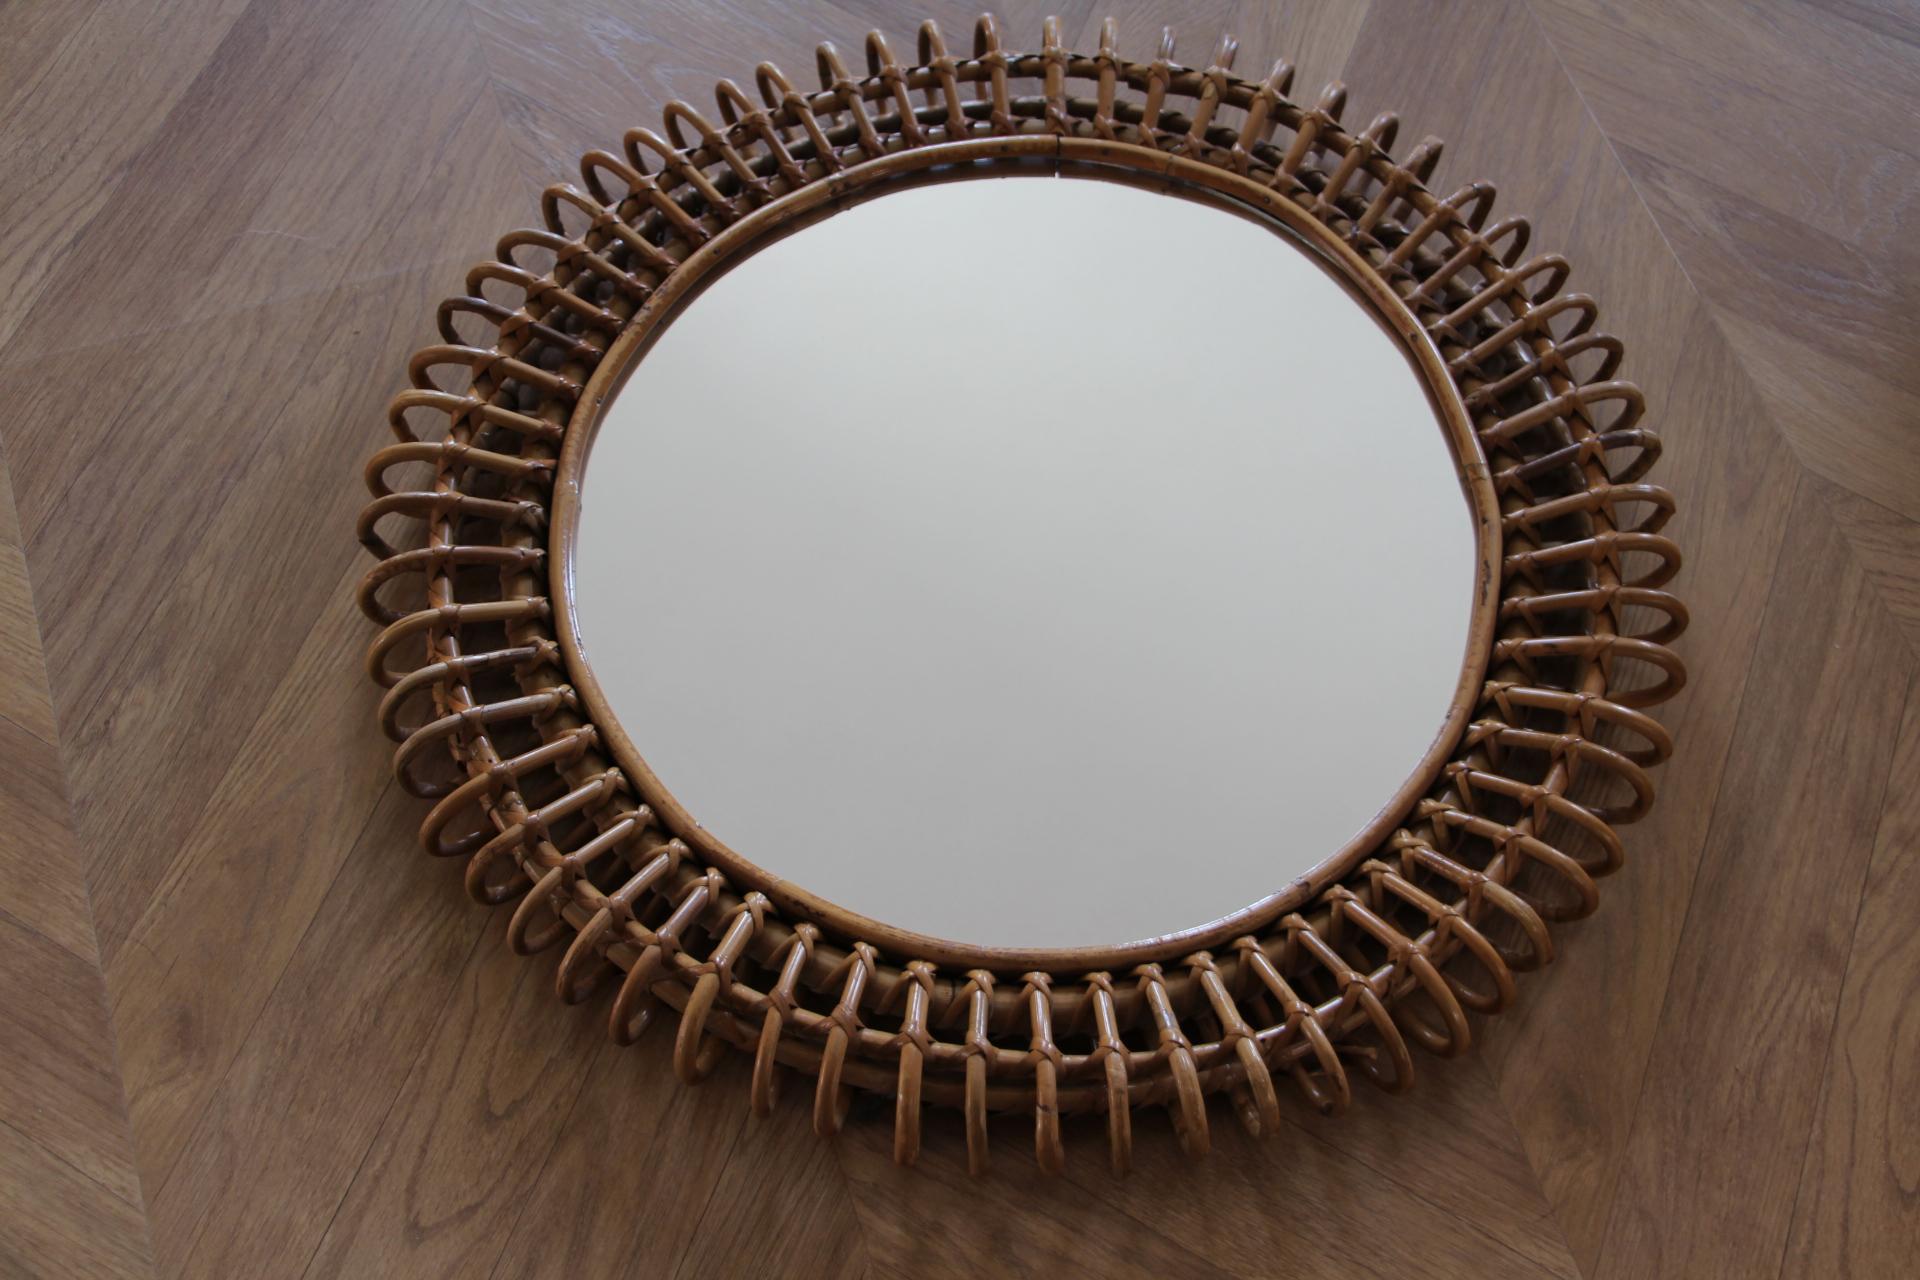 This very decorative mirror was made in Italy in 1960s. It is typical of this period design and is all original. It was handcrafted and is in perfect condition. It has got a beautiful round shape. 
It could be put on a wall on its own or mixed with